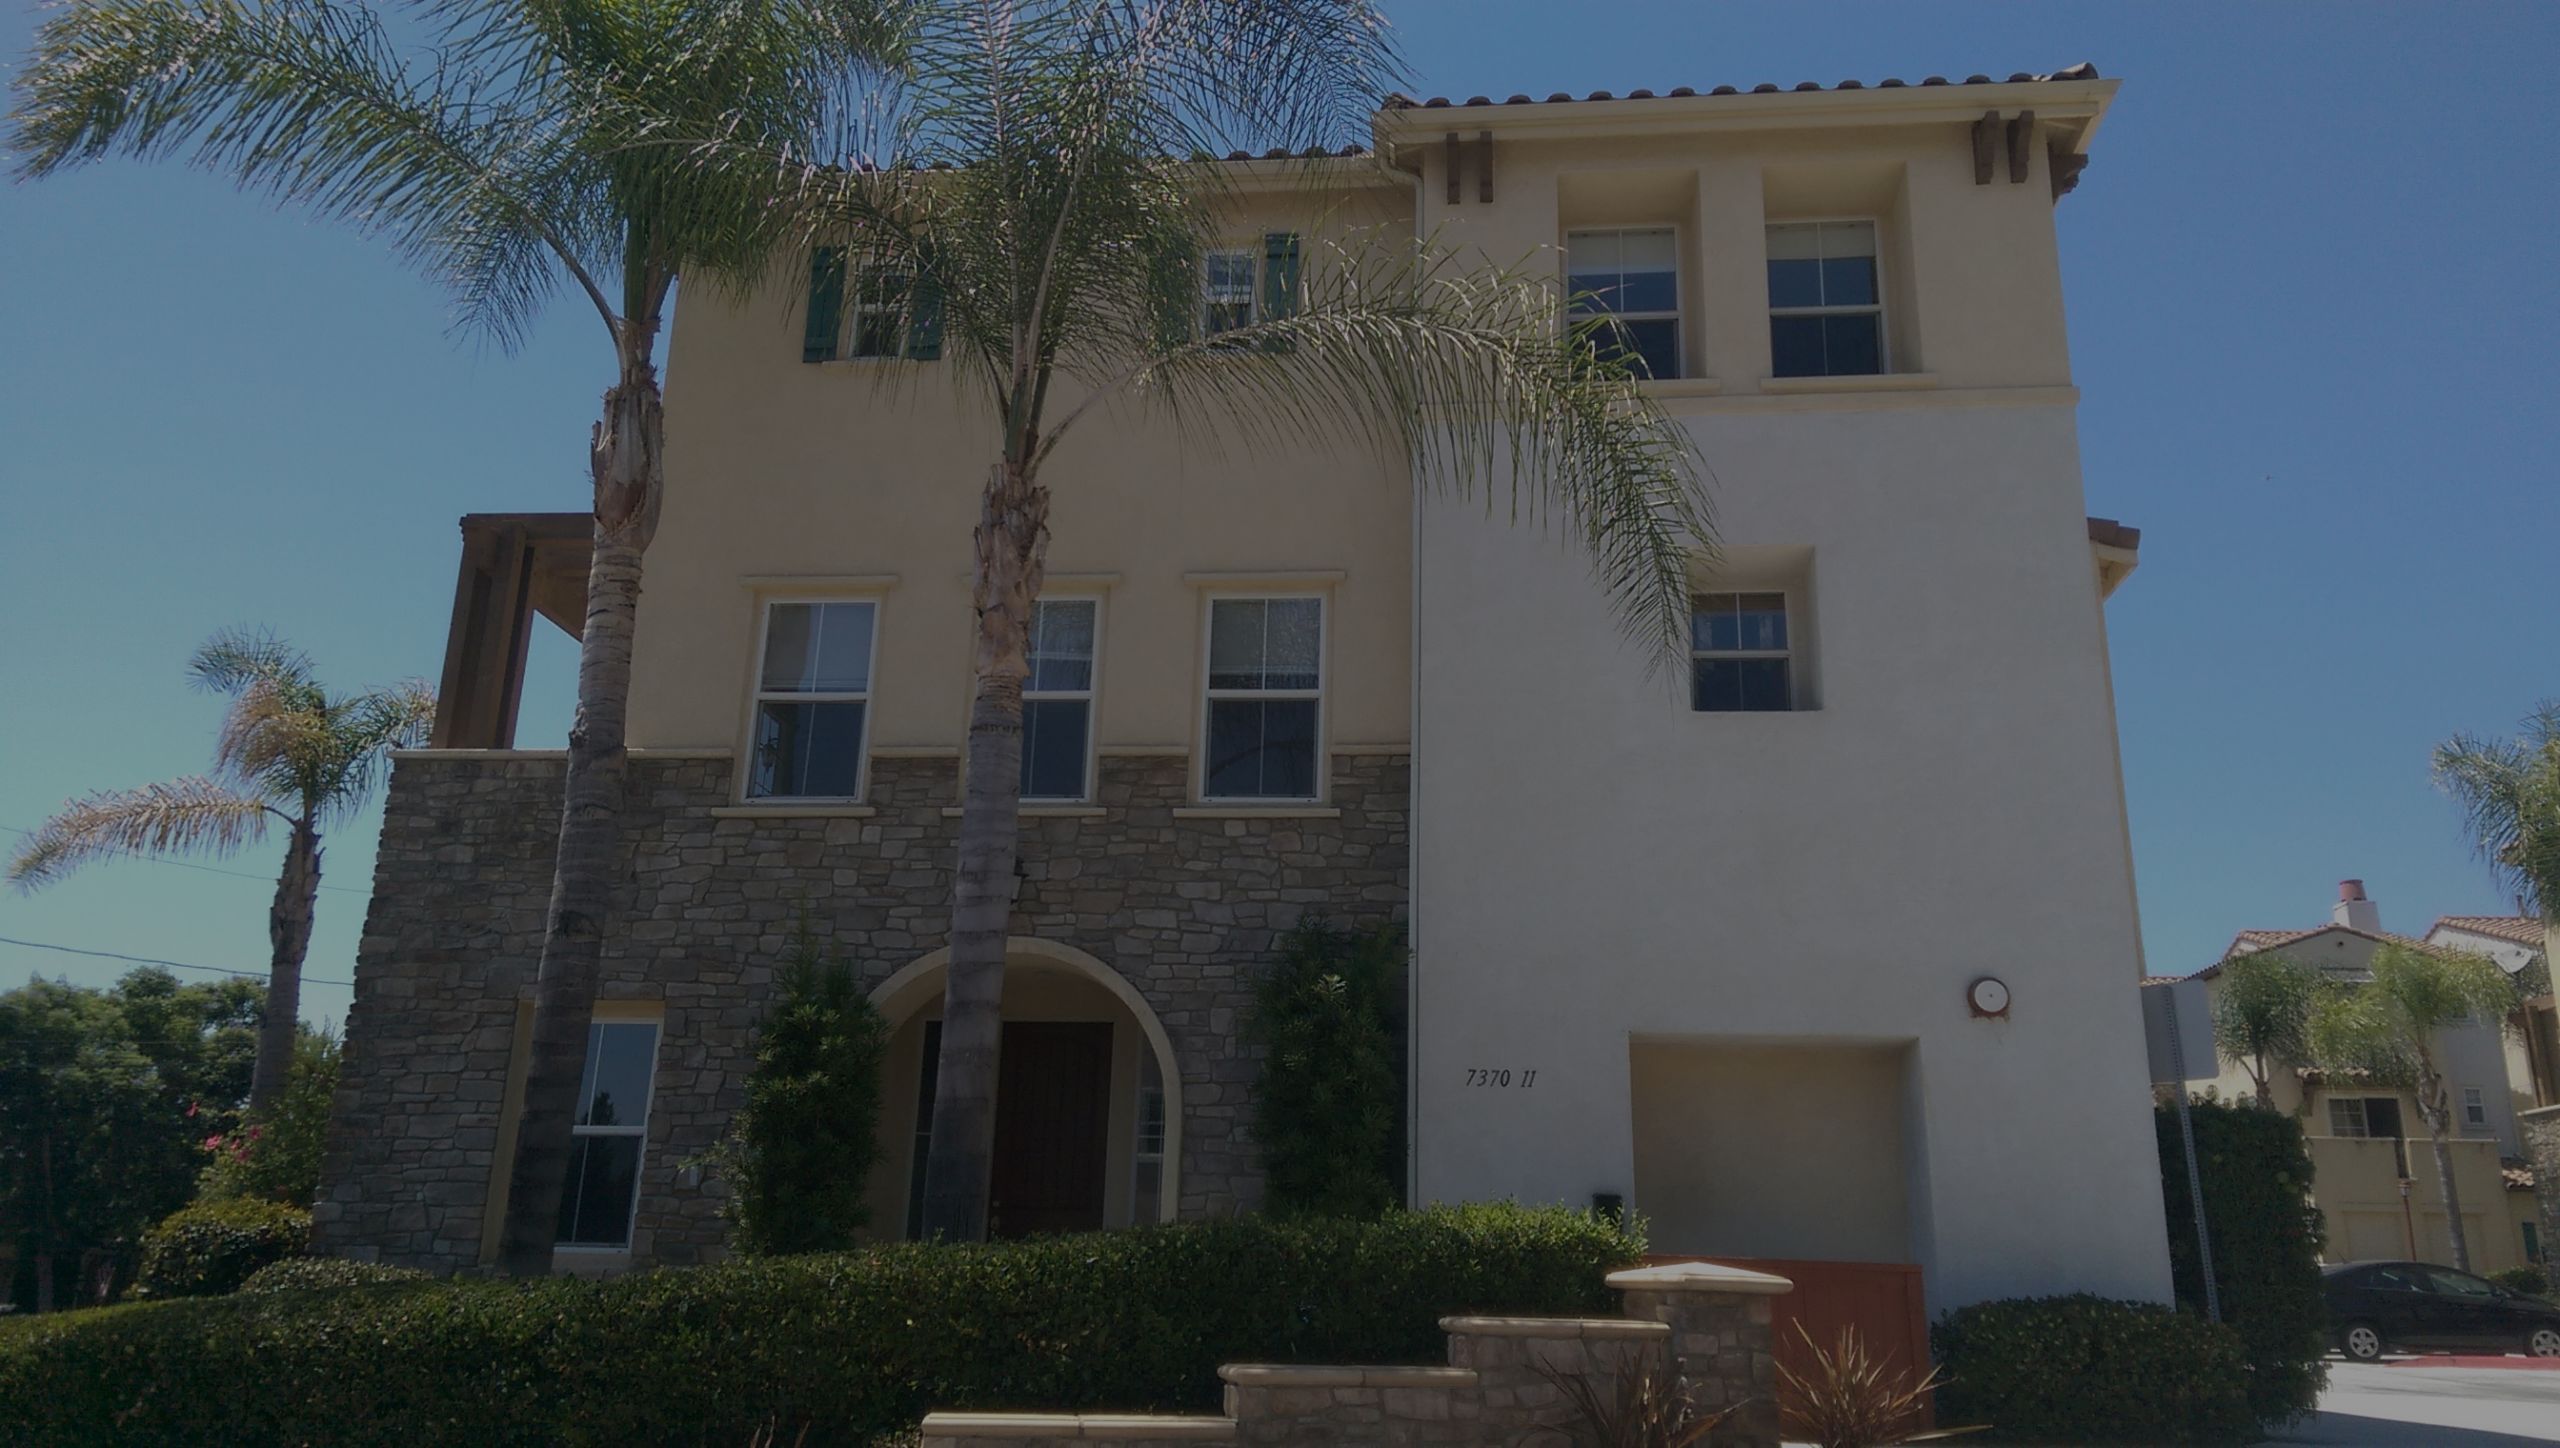 Just Sold In La Mesa, 3 Story Townhome